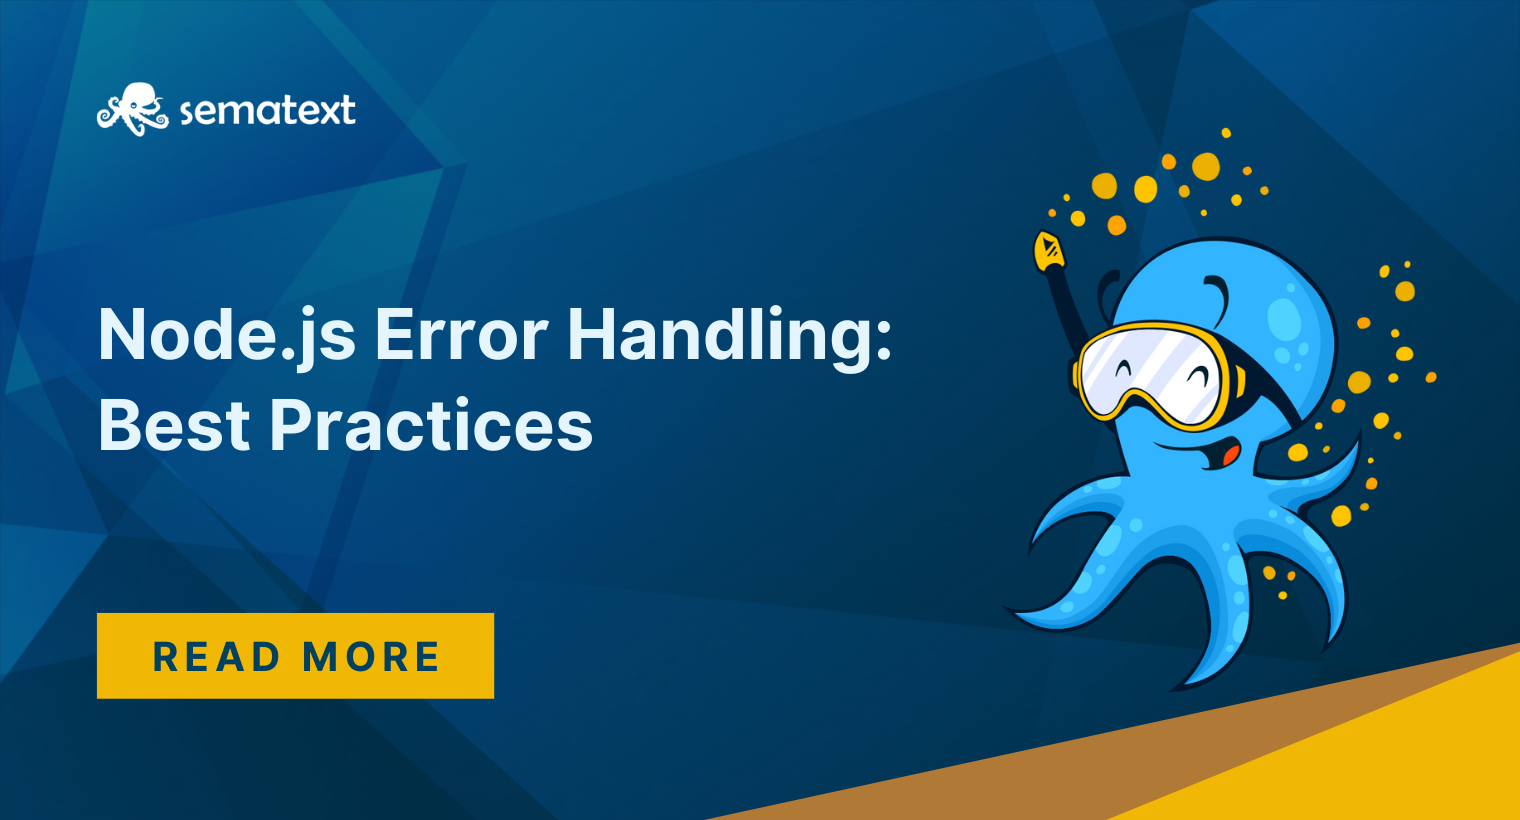 Node.js Error Handling Made Easy: Best Practices On Just About Everything You Need to Know